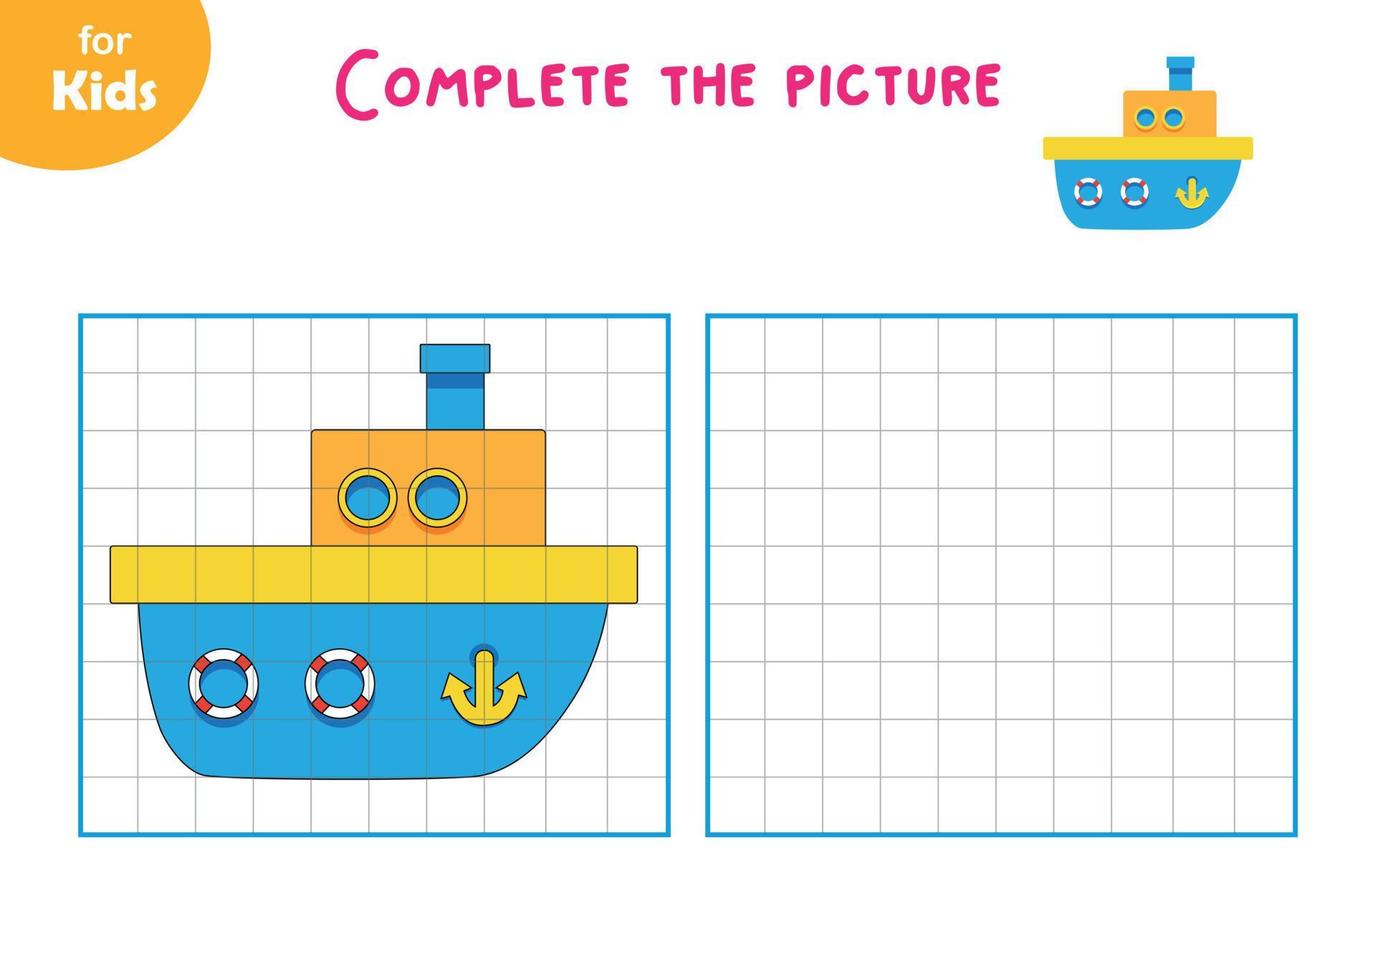 Educational Games For Children. Drawing. Draw A Children's Boat In The Cells, A Sample. Series With Toys. Education And Entertainment For Young Children. Preschool Workbook, Workbook vector